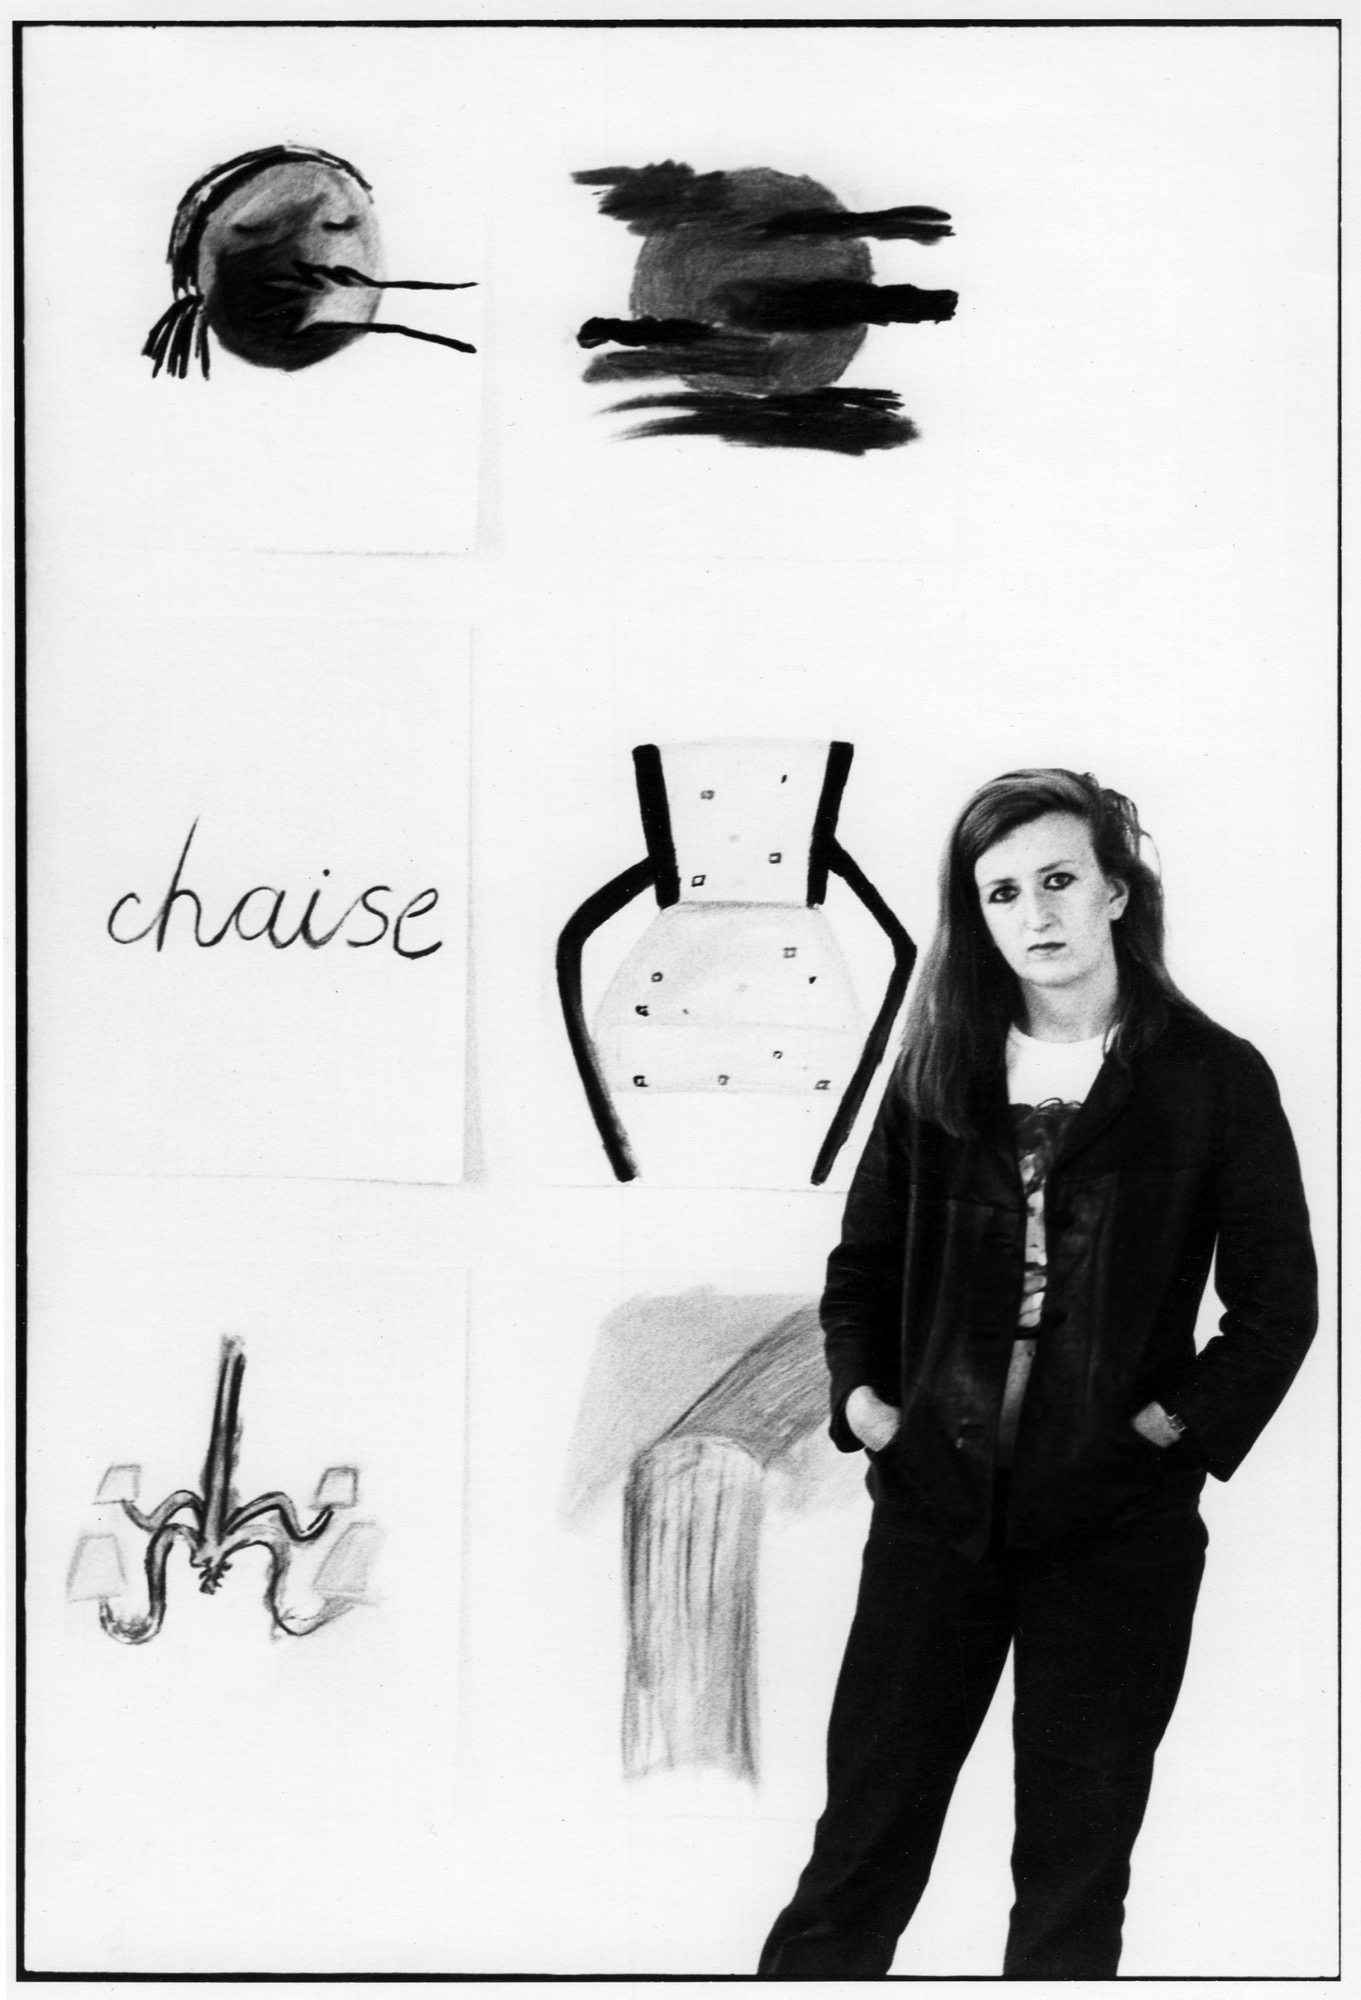 Ruth Maddison, <em>Jenny Watson at Art Projects Gallery</em>, 1982, silver gelatin vintage print, 23 x 15.4 cm (image size). Courtesy of the artist and the Centre for Contemporary Photography.